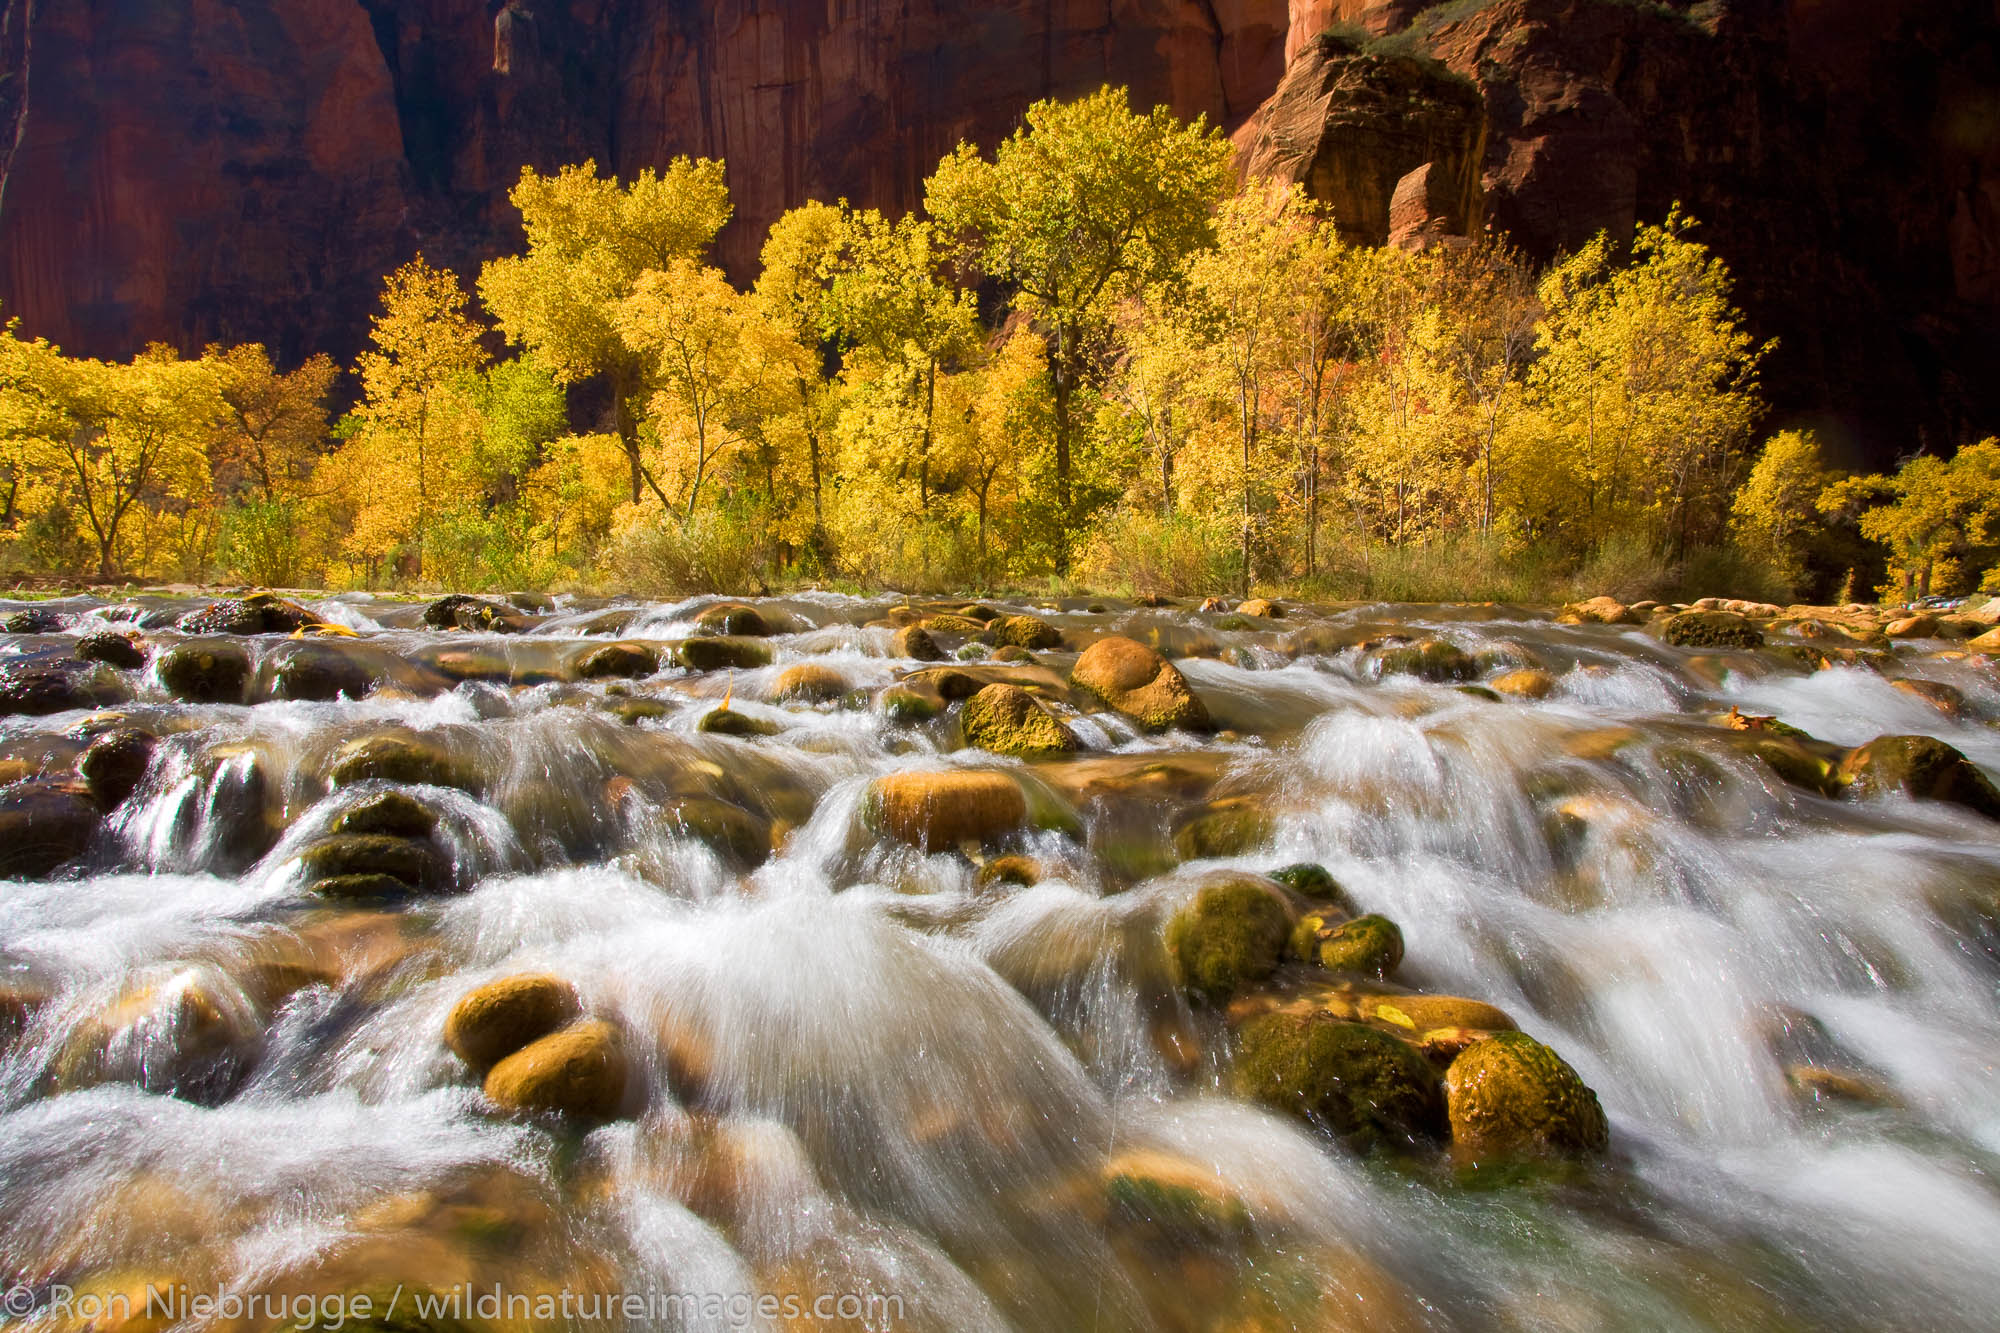 The Virgin River at the Temple of Sinawava, Zion National Park, Utah.